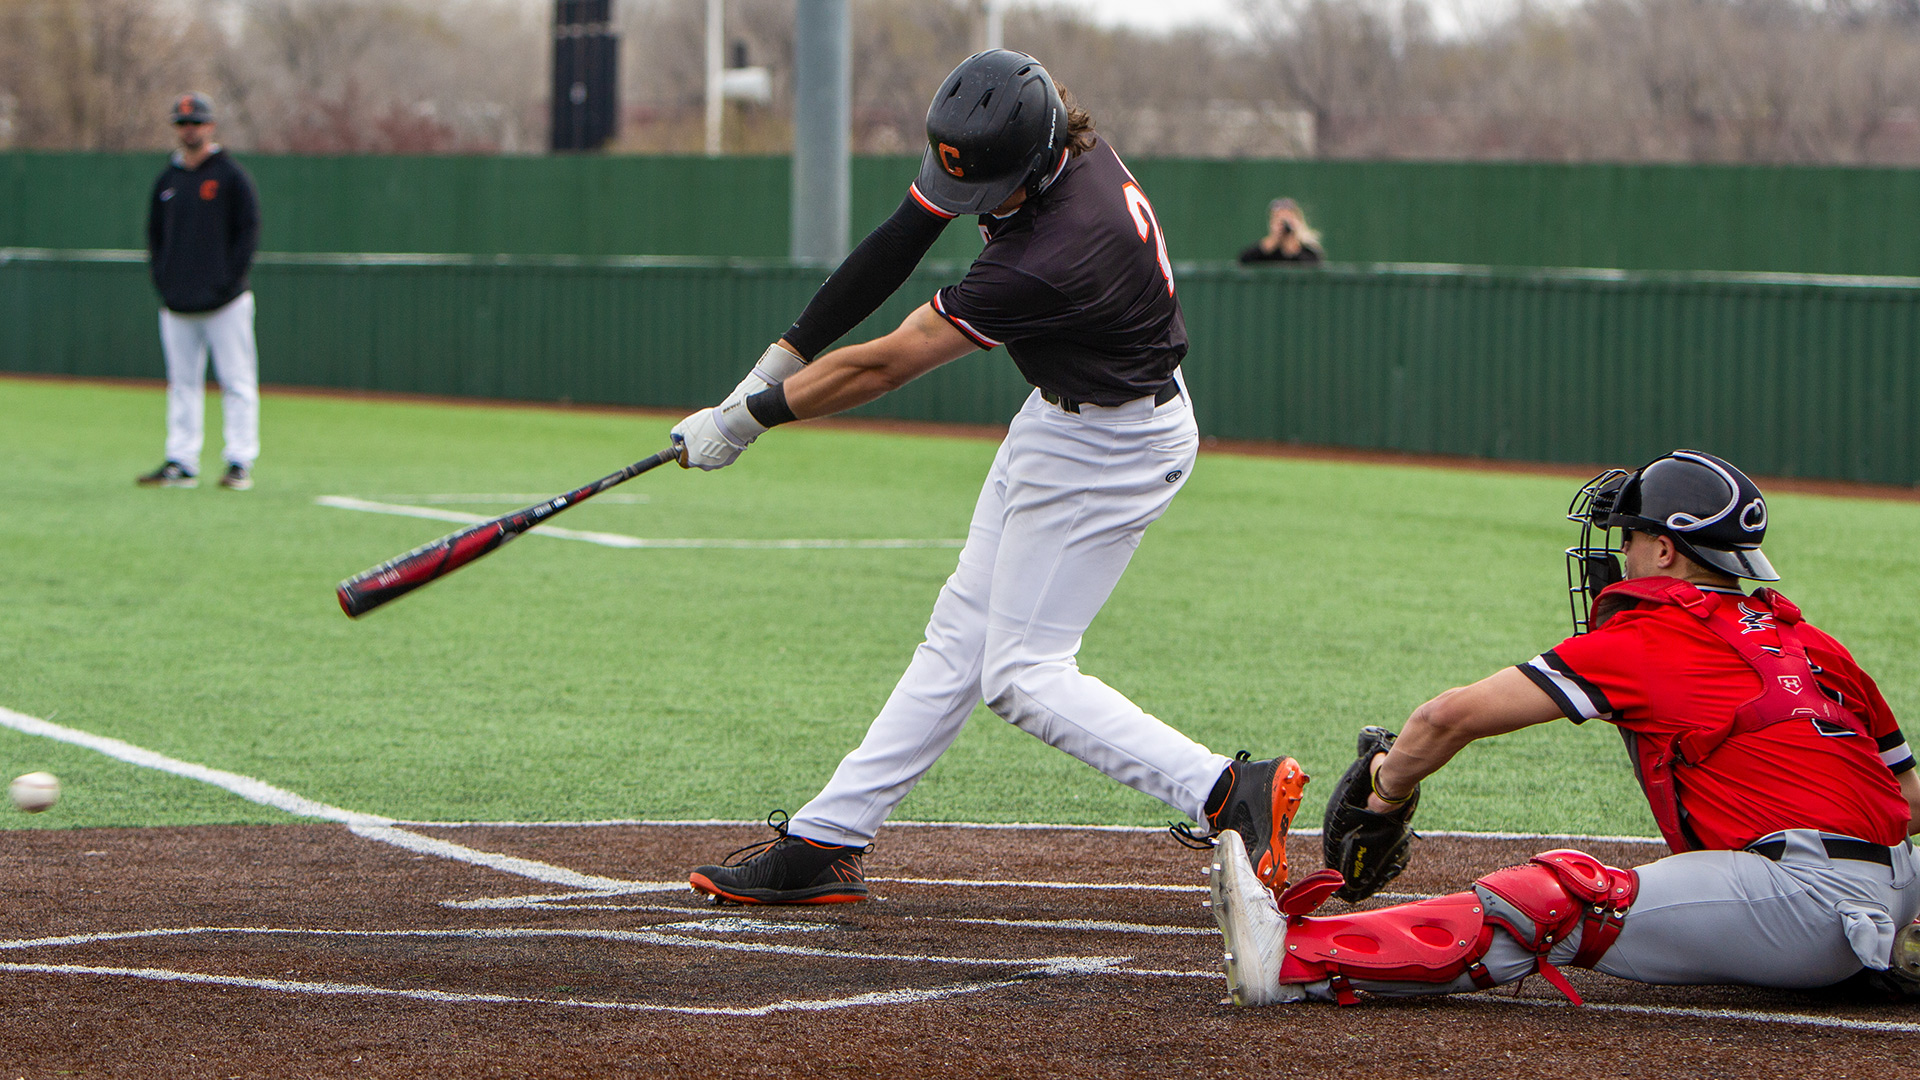 Tigers split games at Allen, take three of four in series